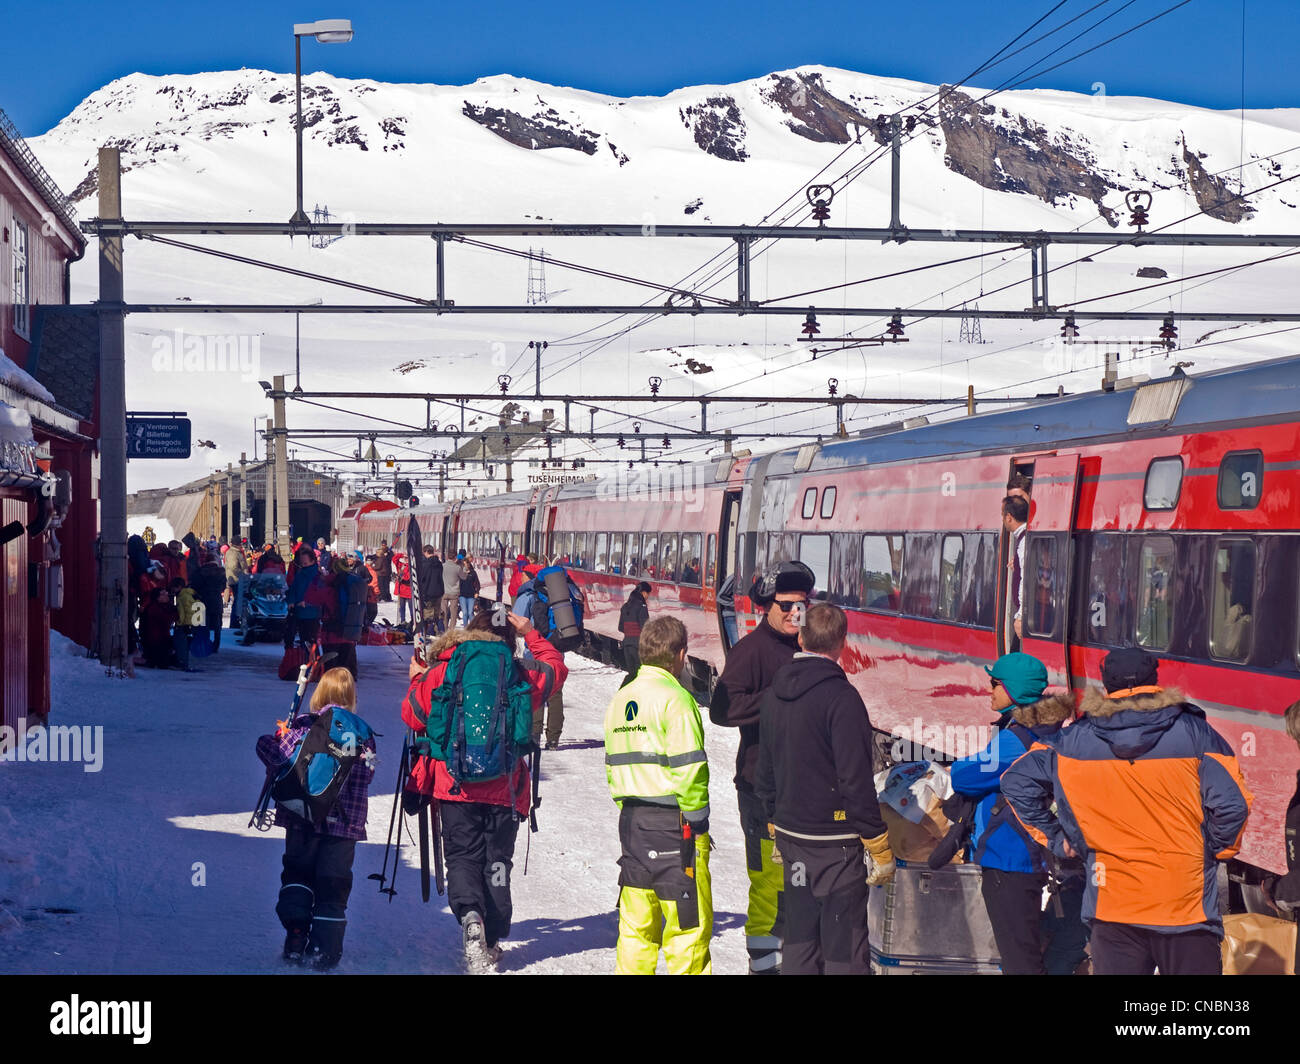 Finse railway station on the Hardanger plateau in Norway. Oslo to Bergen railway Stock Photo